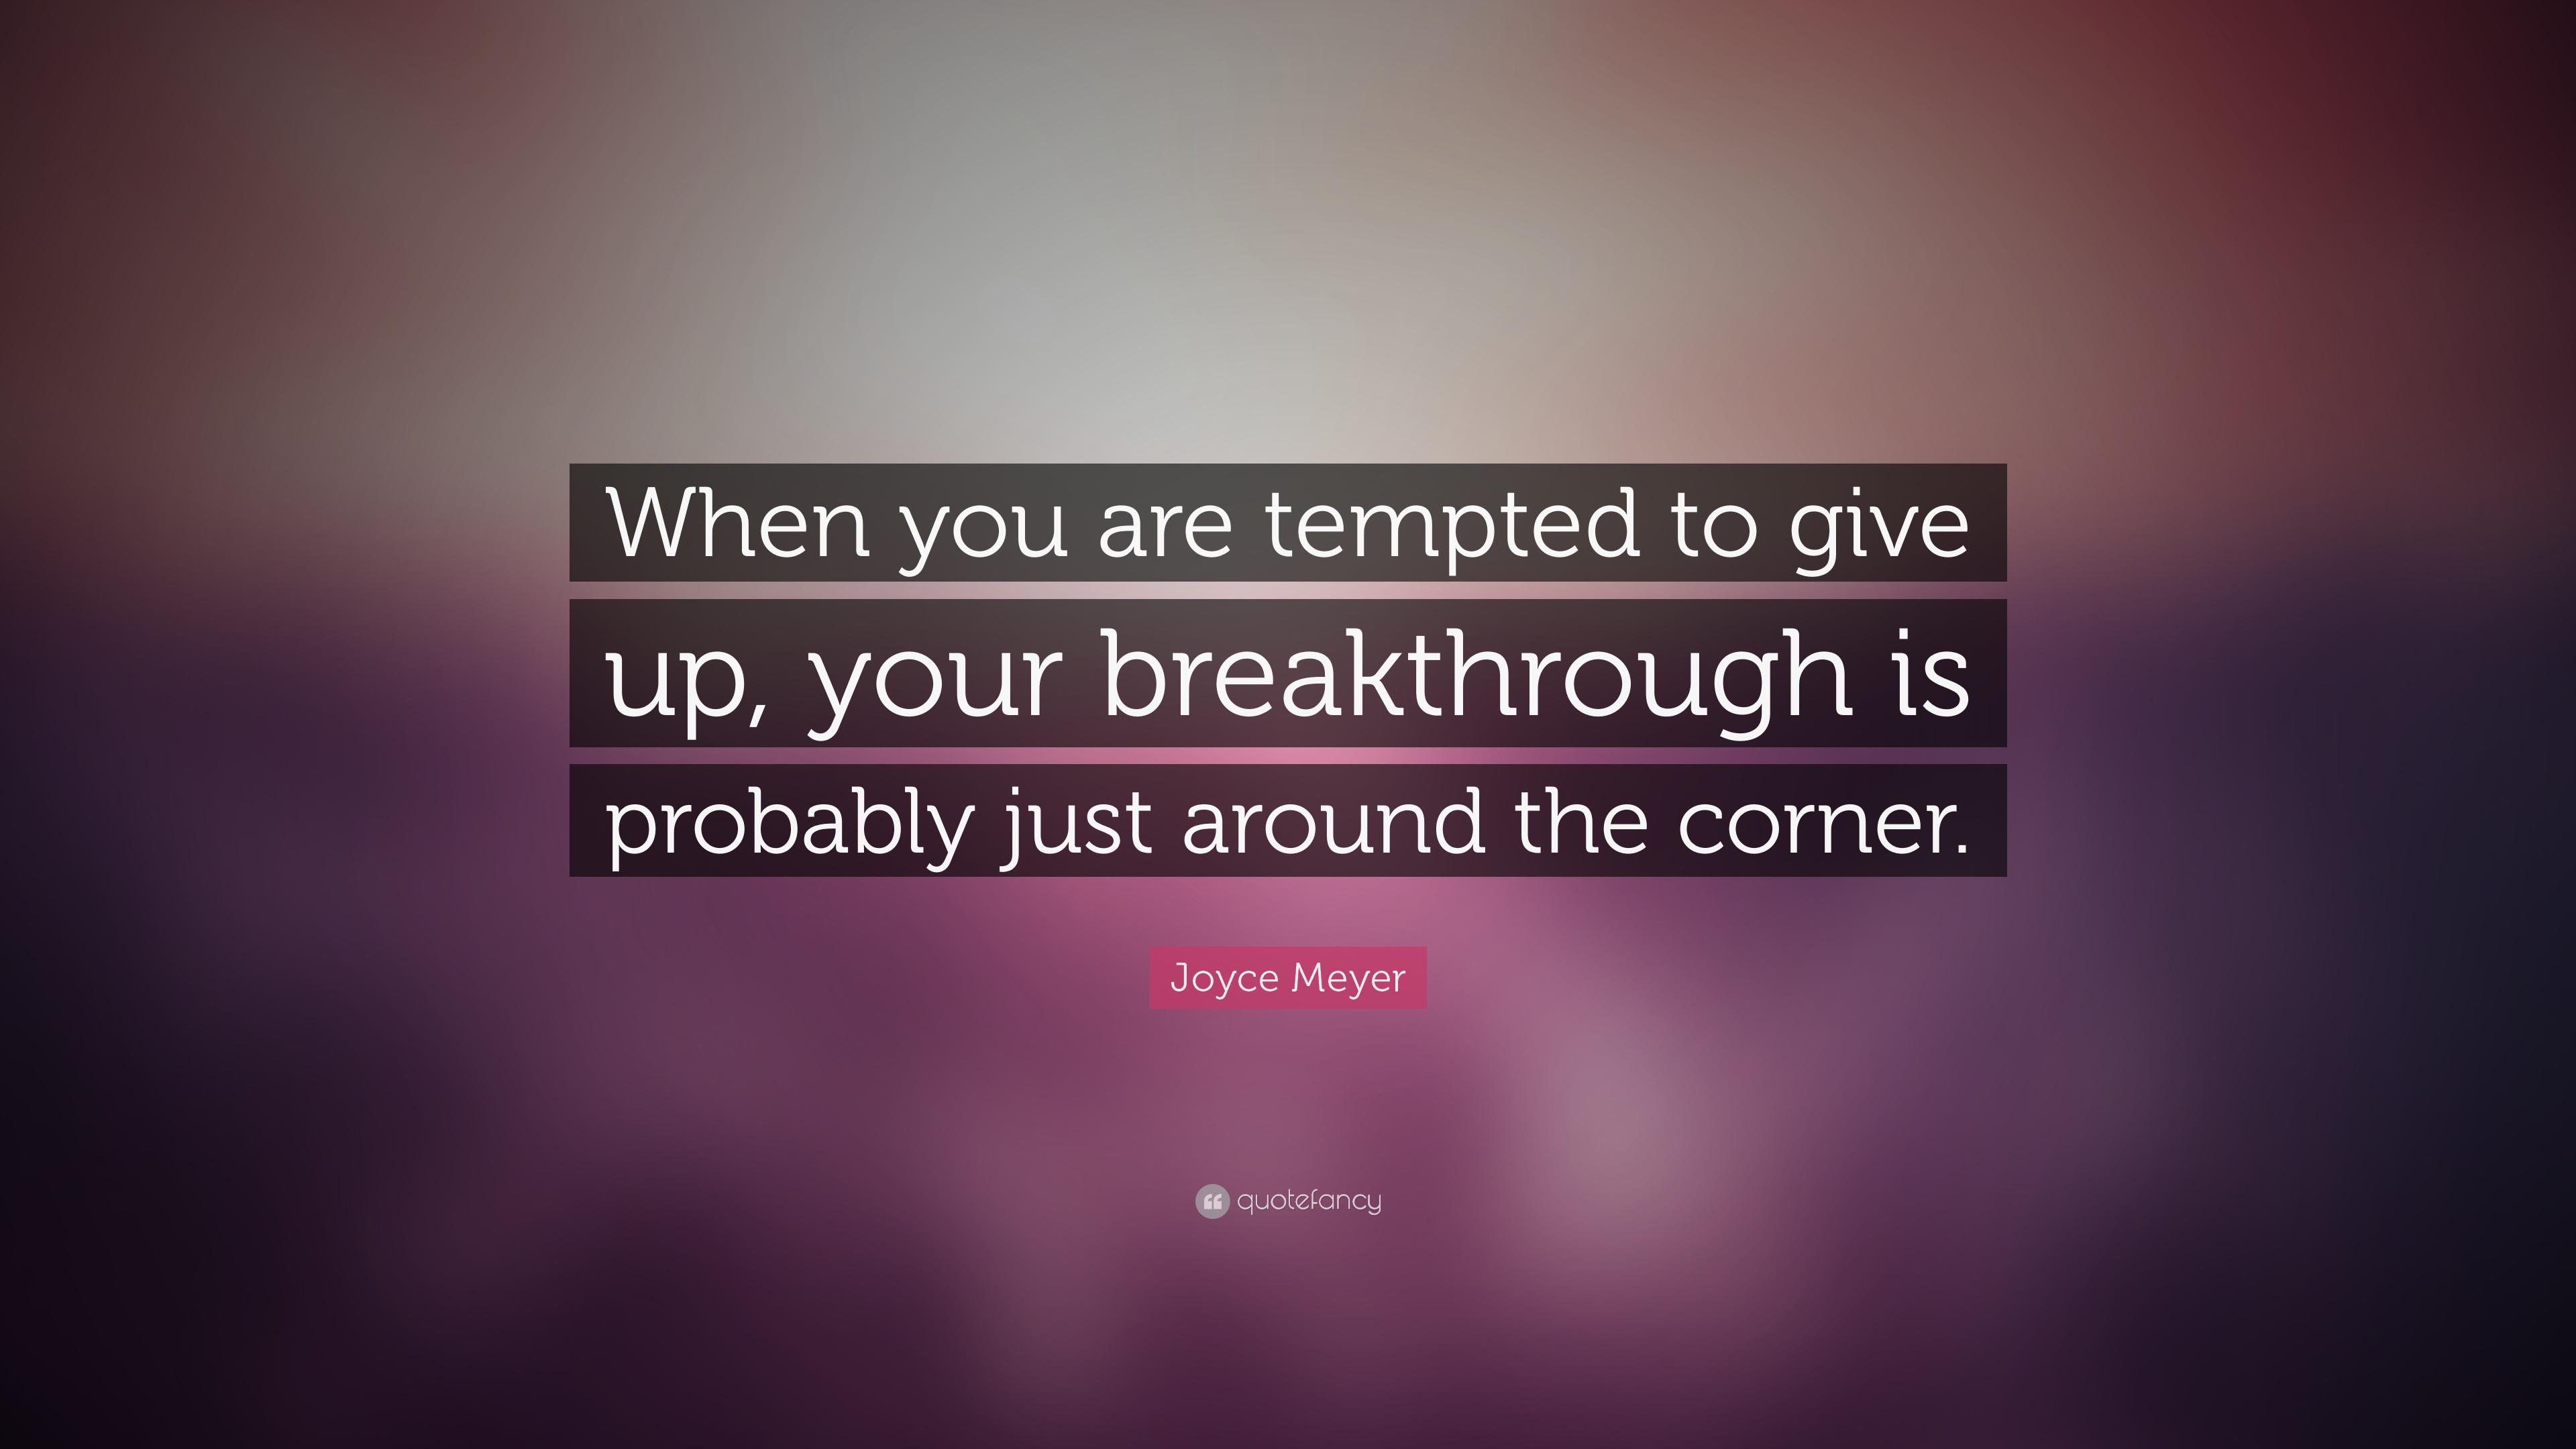 Joyce Meyer Quote: “When you are tempted to give up, your